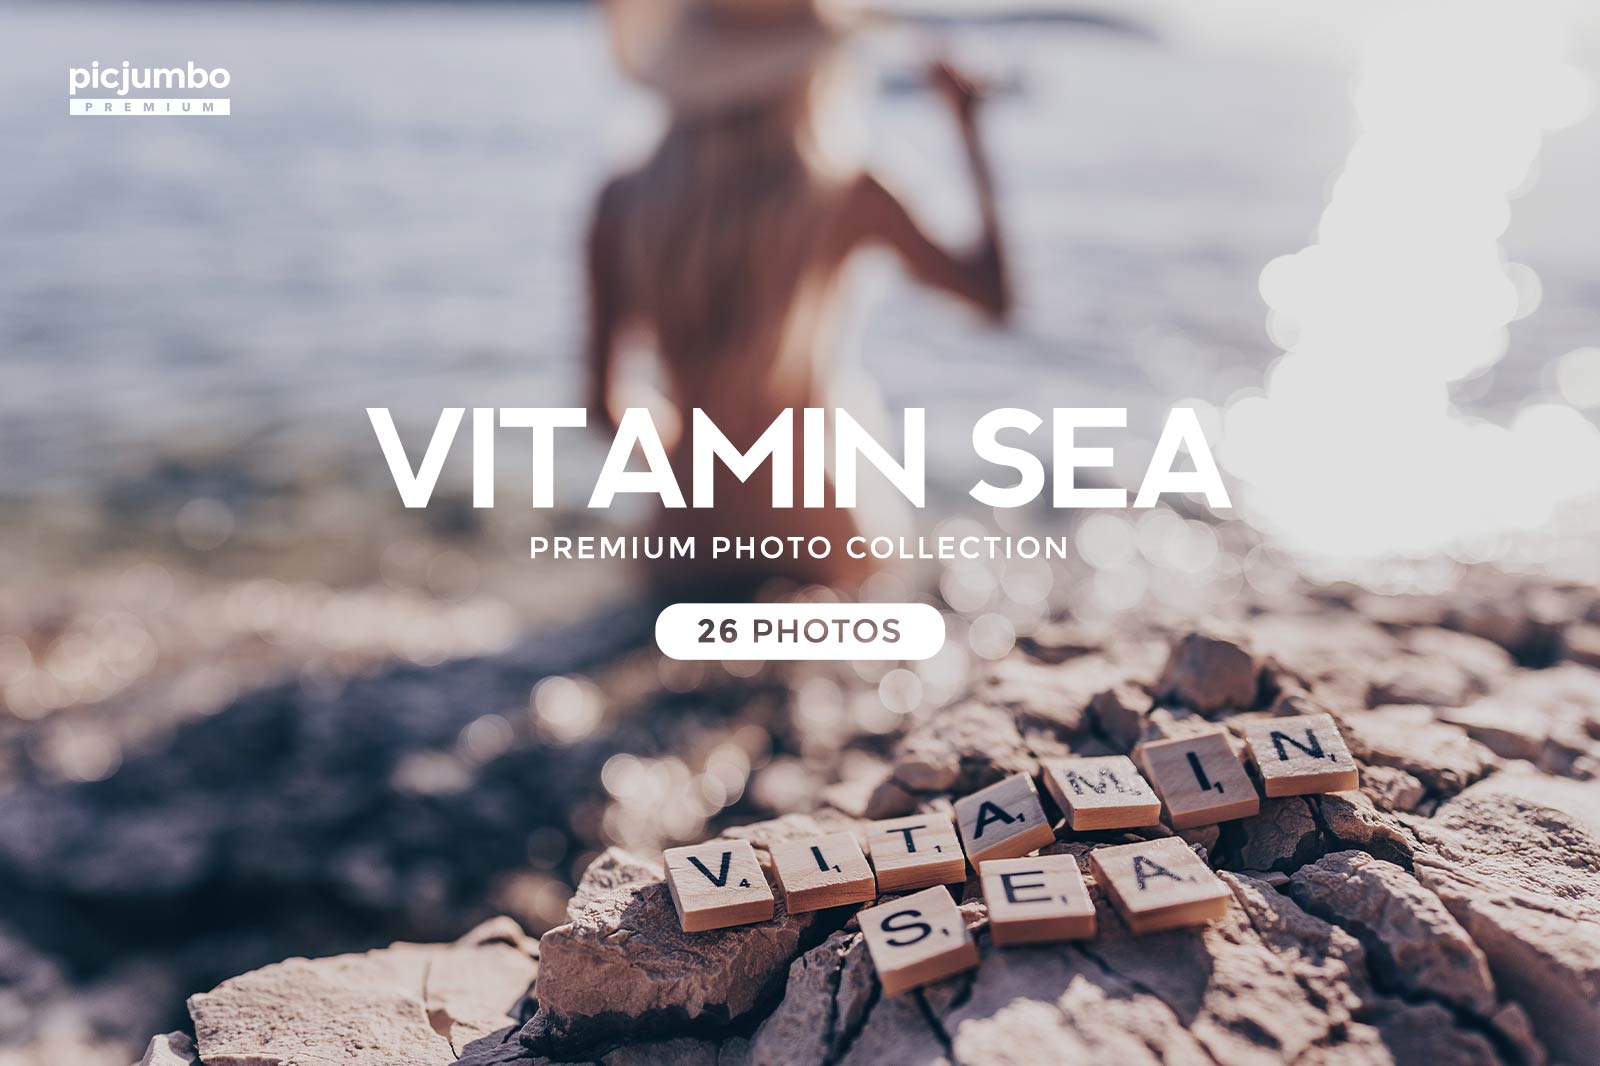 Download hi-res stock photos from our Vitamin Sea PREMIUM Collection!